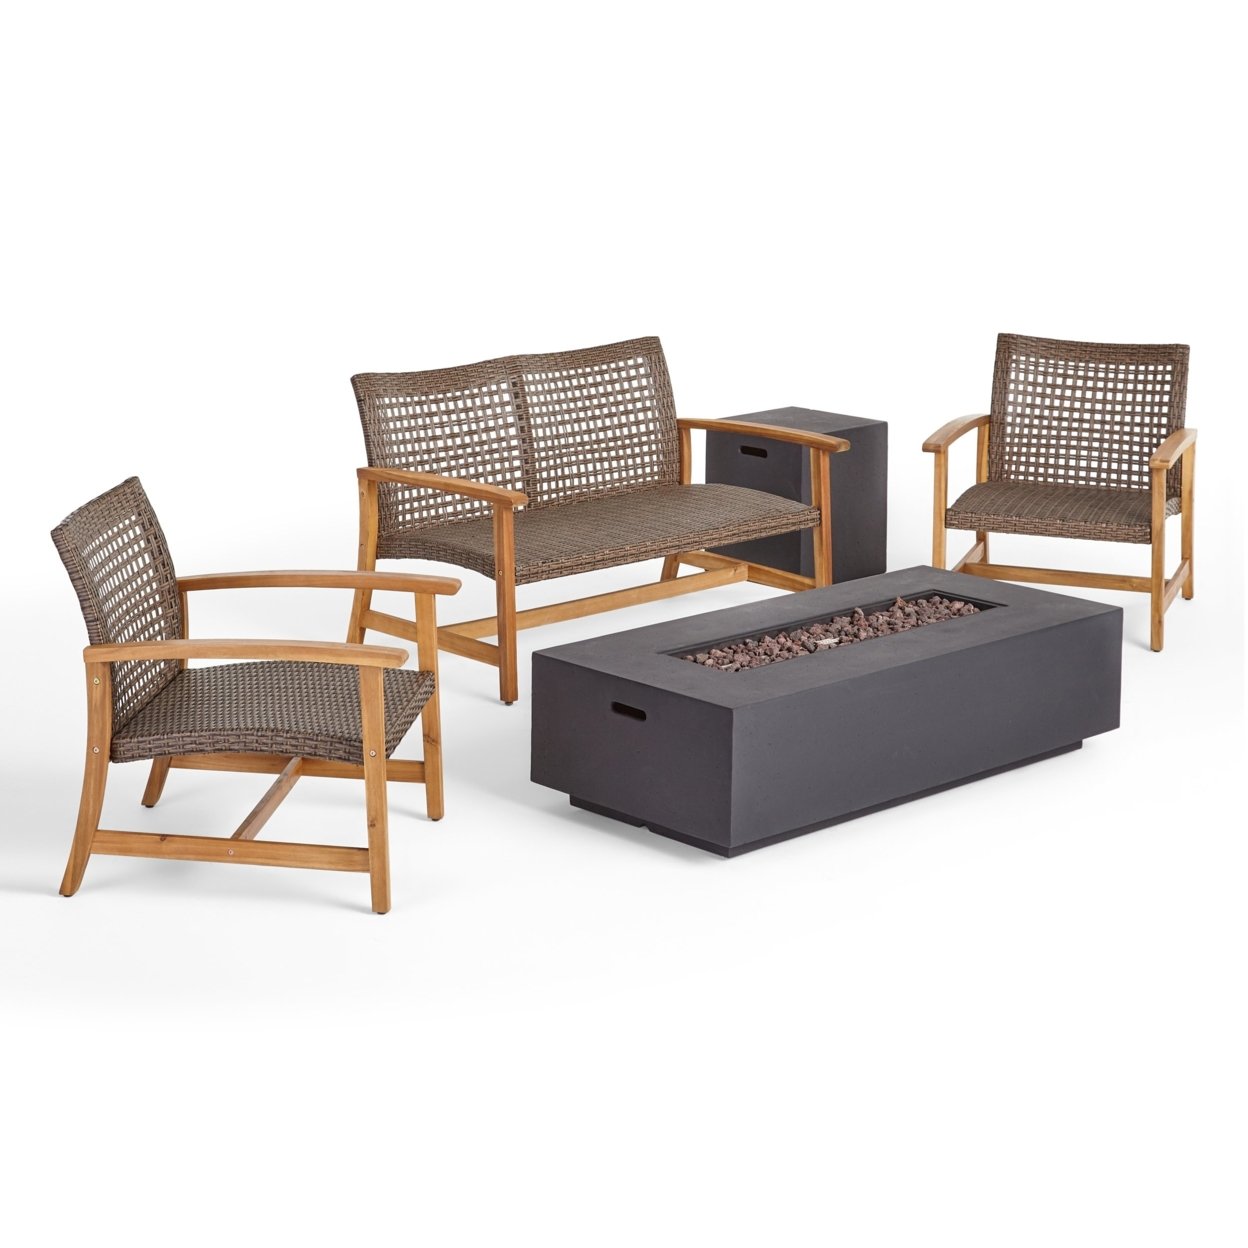 Allison Outdoor 5 Piece Wood And Wicker Chat Set With Fire Pit - Mixed Black, Light Gray Washed Finish, Dark Gray